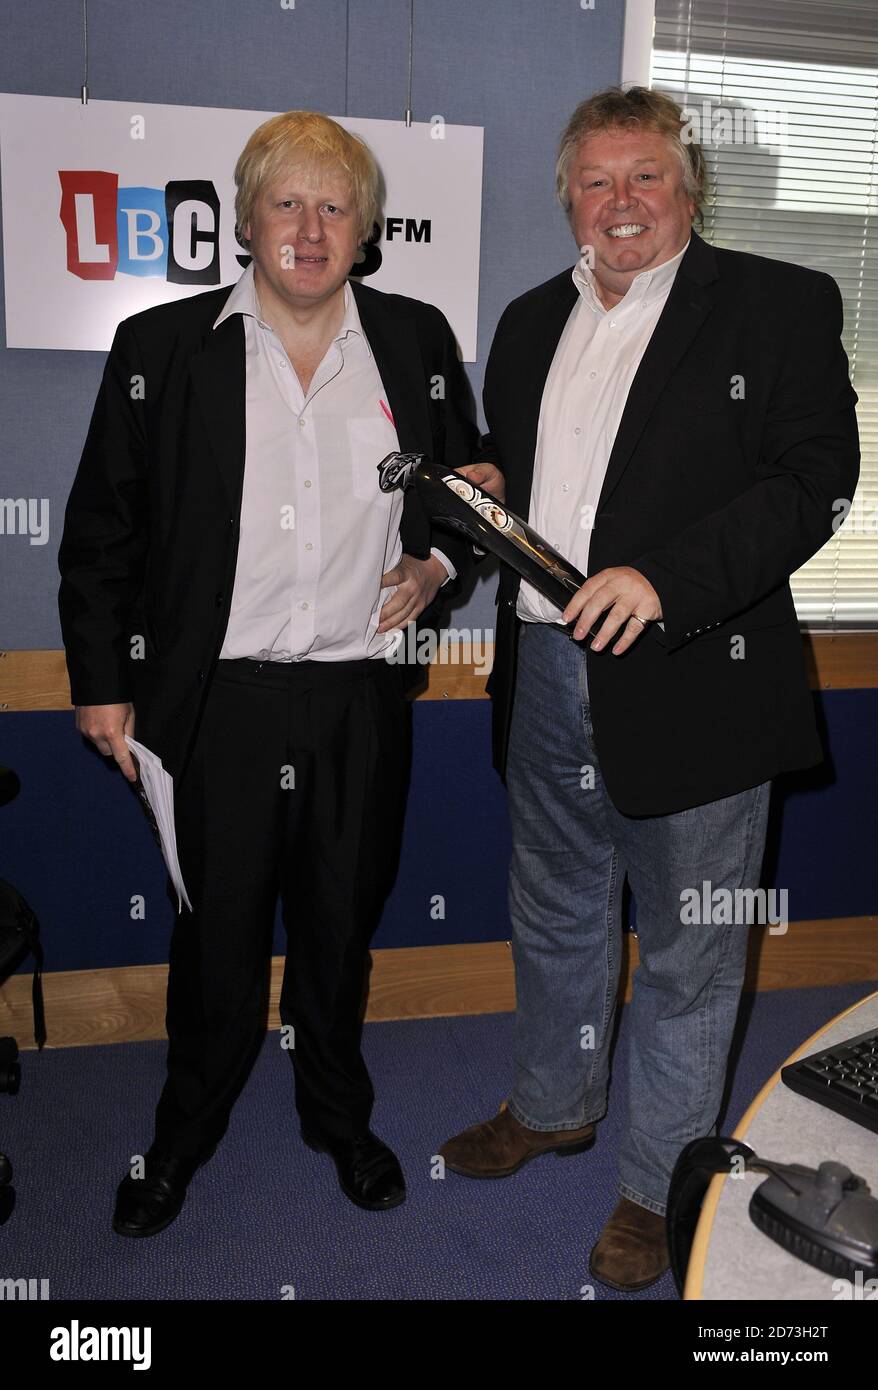 Boris Johnson being presented with a mudguard for his bike, by LBC DJ NIck Ferrari, after an interview on the radio station's breakfast show at their studio in Leicester Square, London. Stock Photo